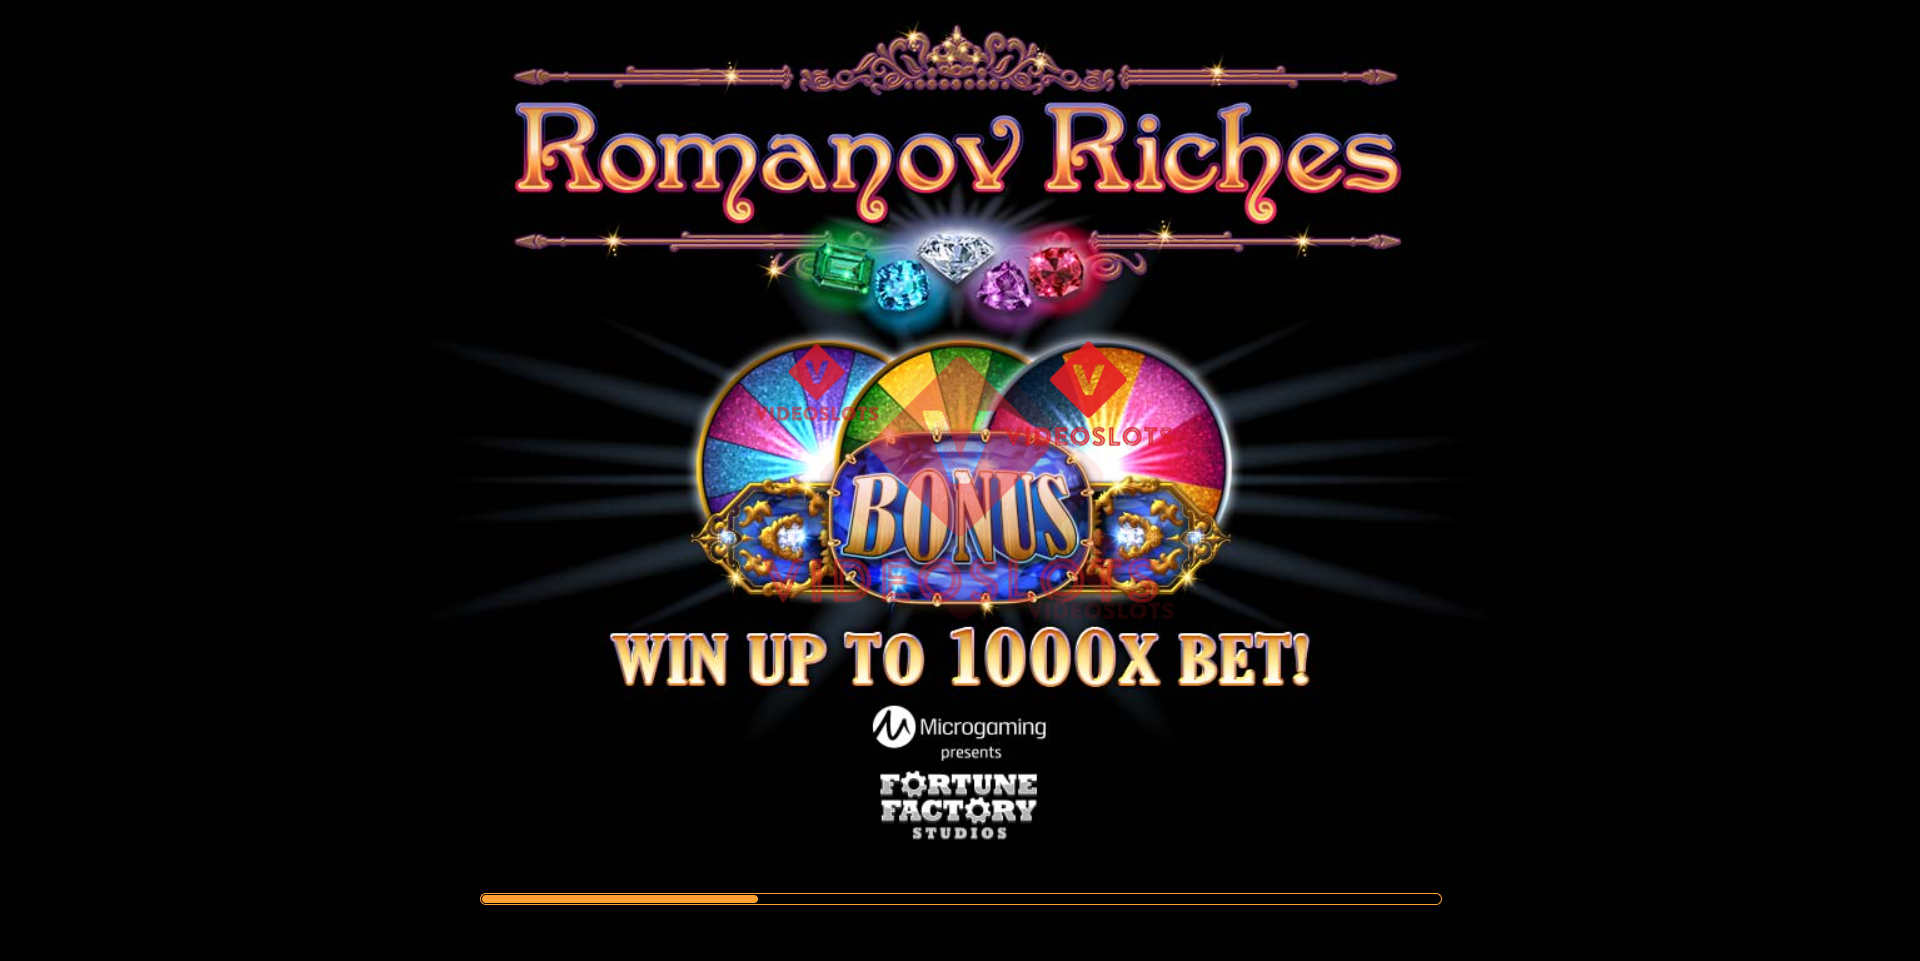 Game Intro for Romanov Riches slot for Microgaming